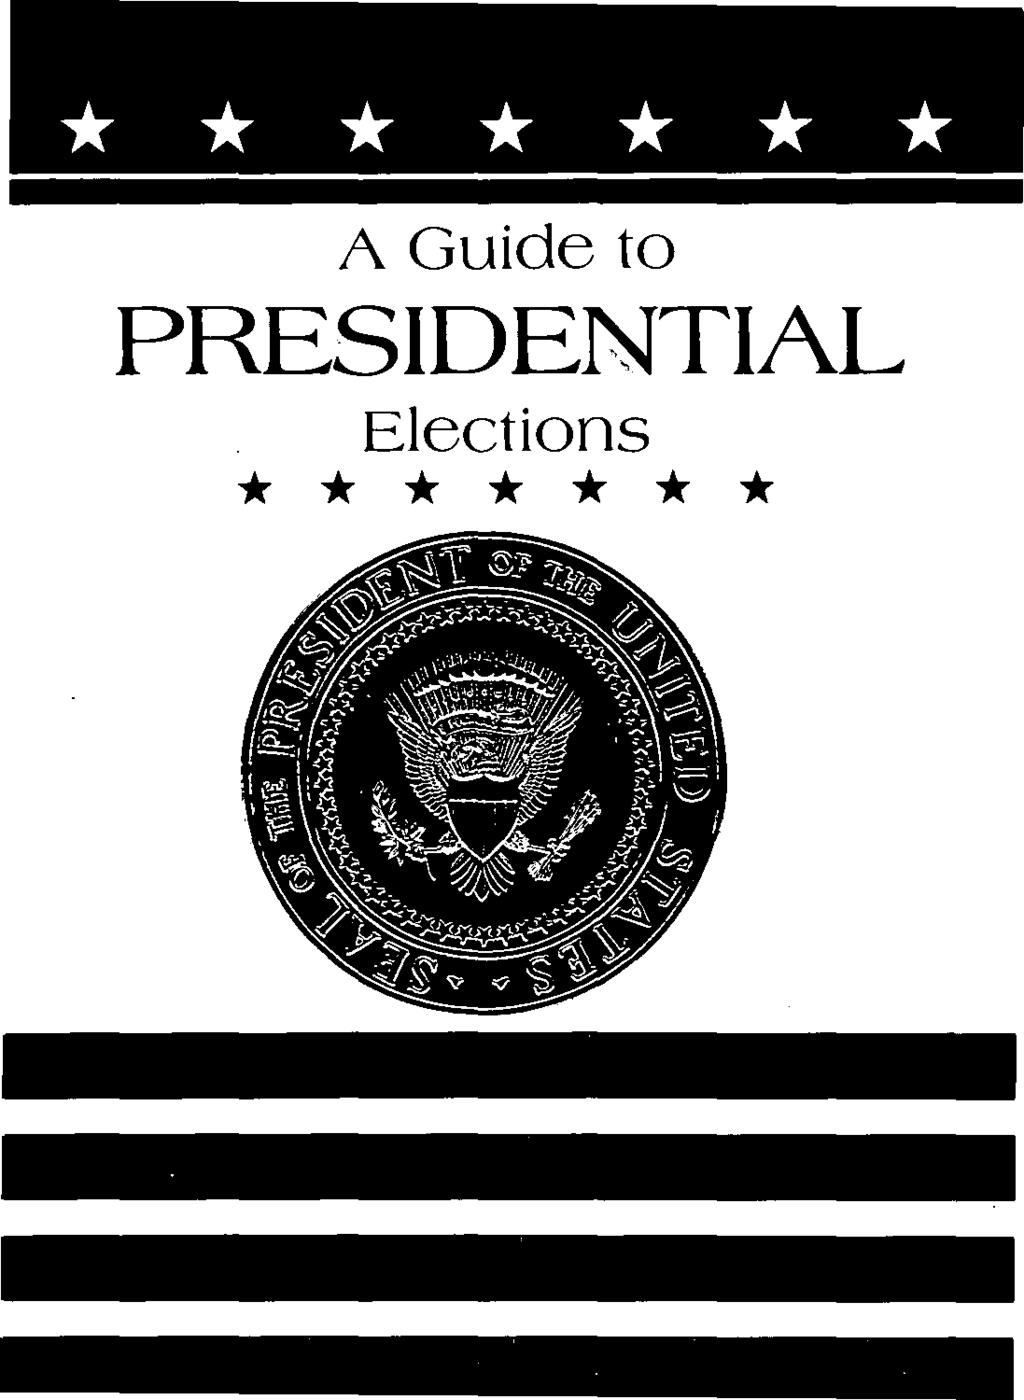 A Guide to PRESIDENTIAL